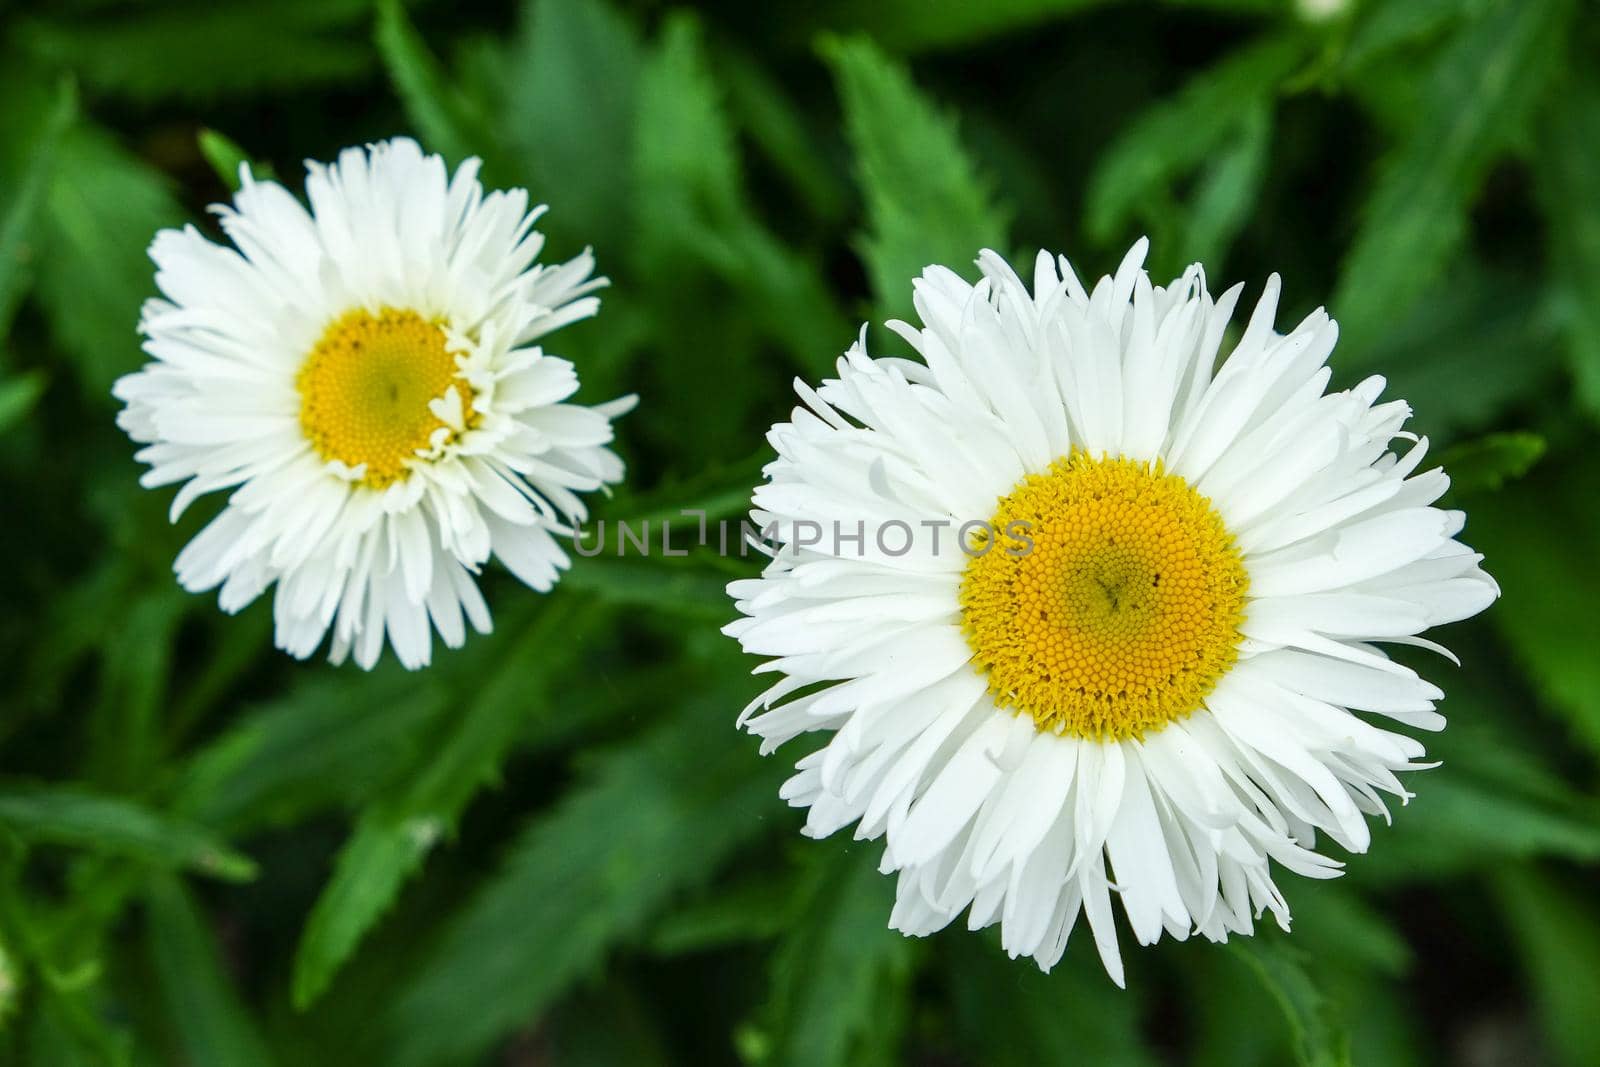 photo with two beautiful daisies. Flowers have white leaves, and gold centers consist of small yellow balls. Chamomile grow from dark green grass